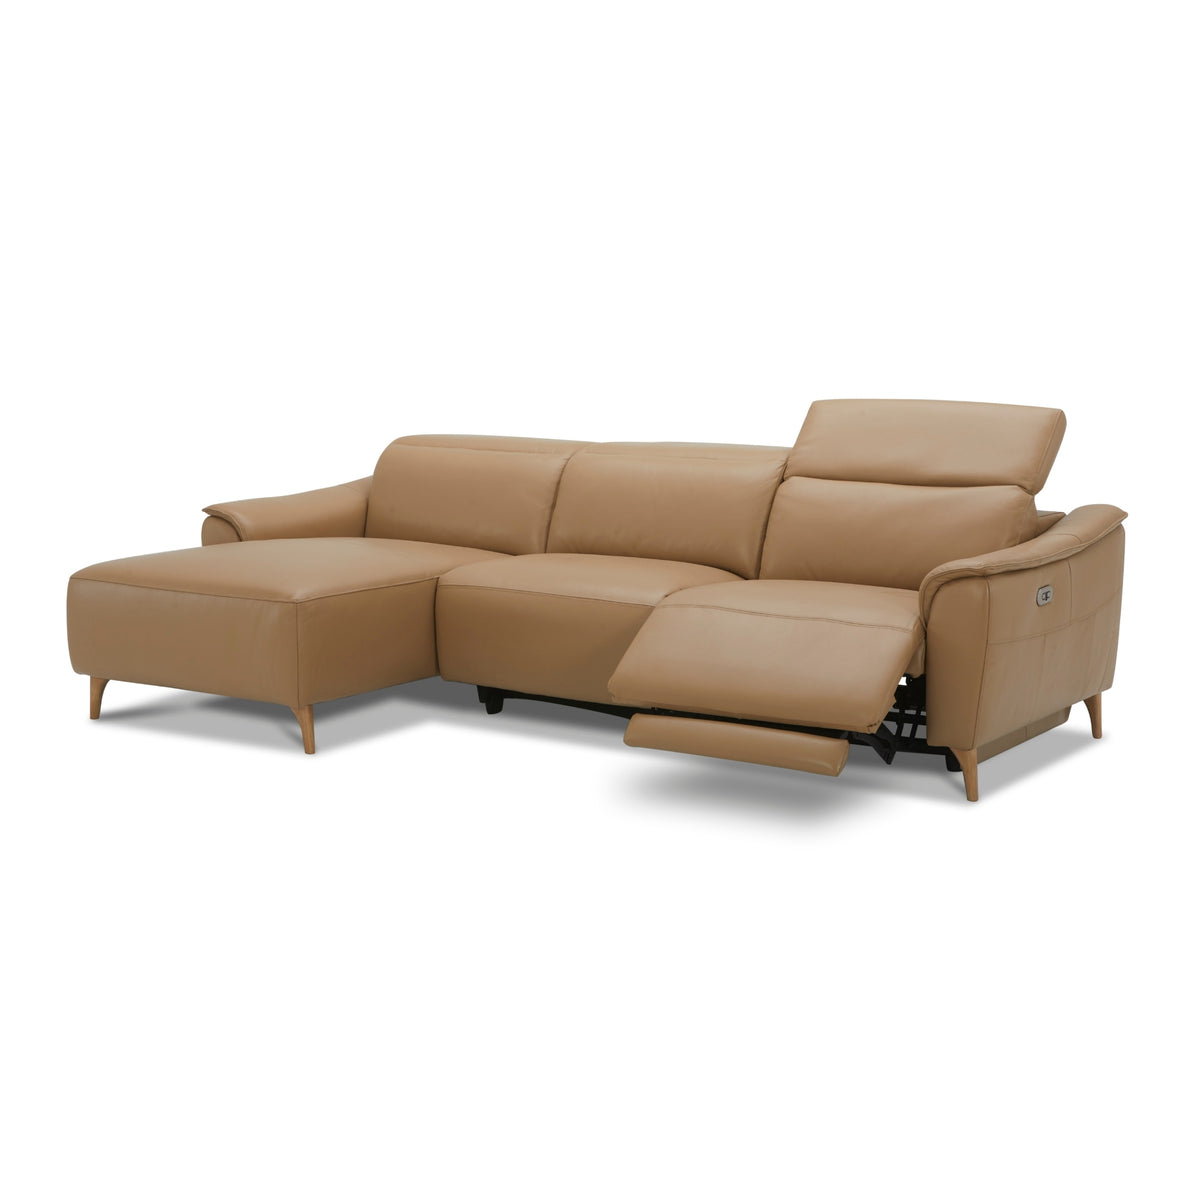 Inala 2 Seater Leather Electric Recliner Chaise Sofa Latte Left